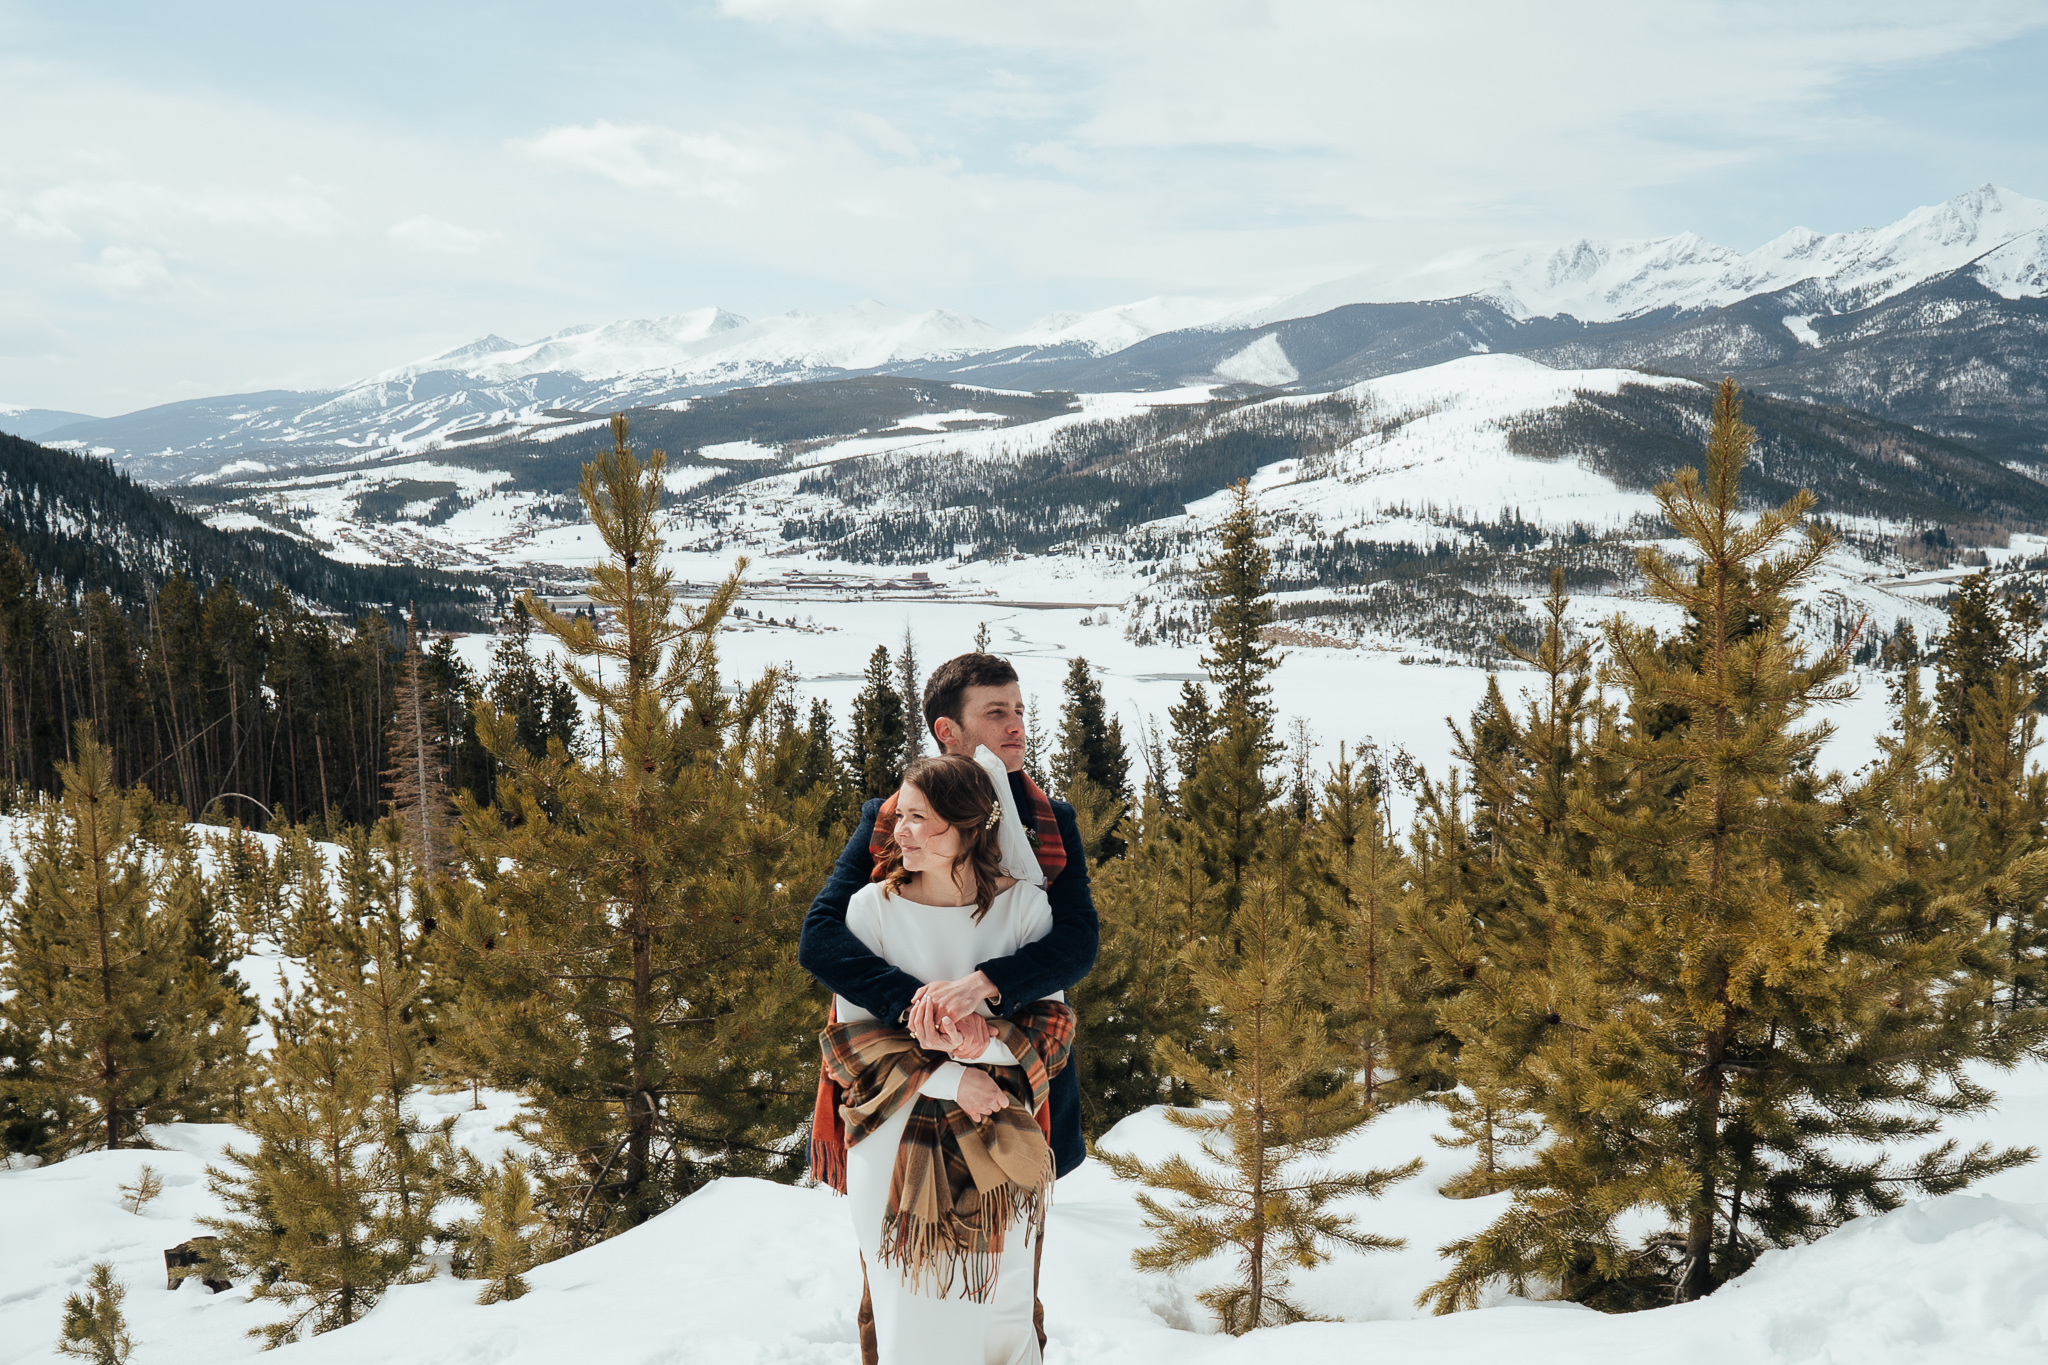 A couple embracing with the snow covered mountains surrounding them.